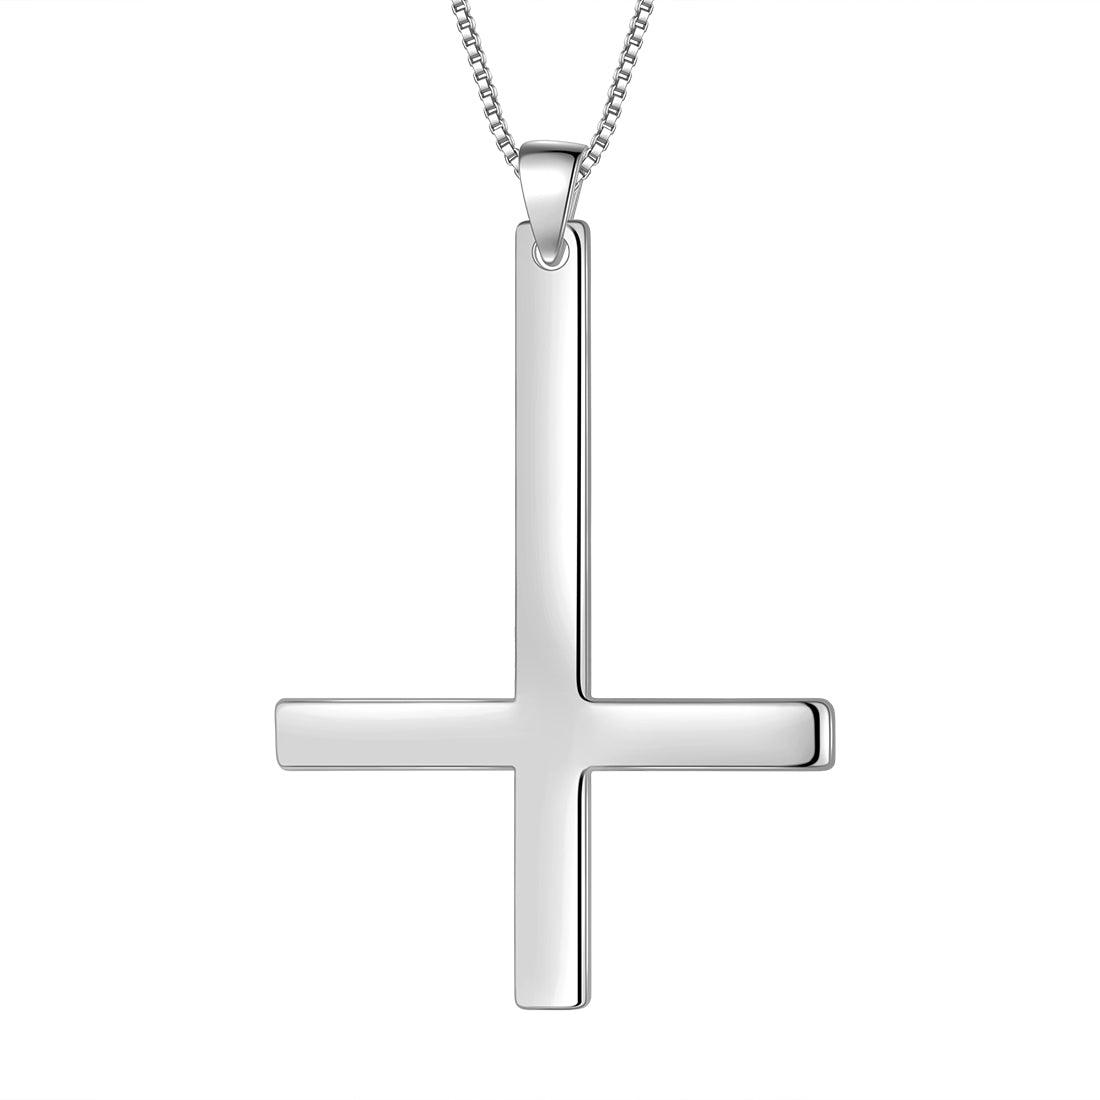 Mens Inverted Cross Necklace Pendant Sterling Silver - Necklaces - Aurora Tears